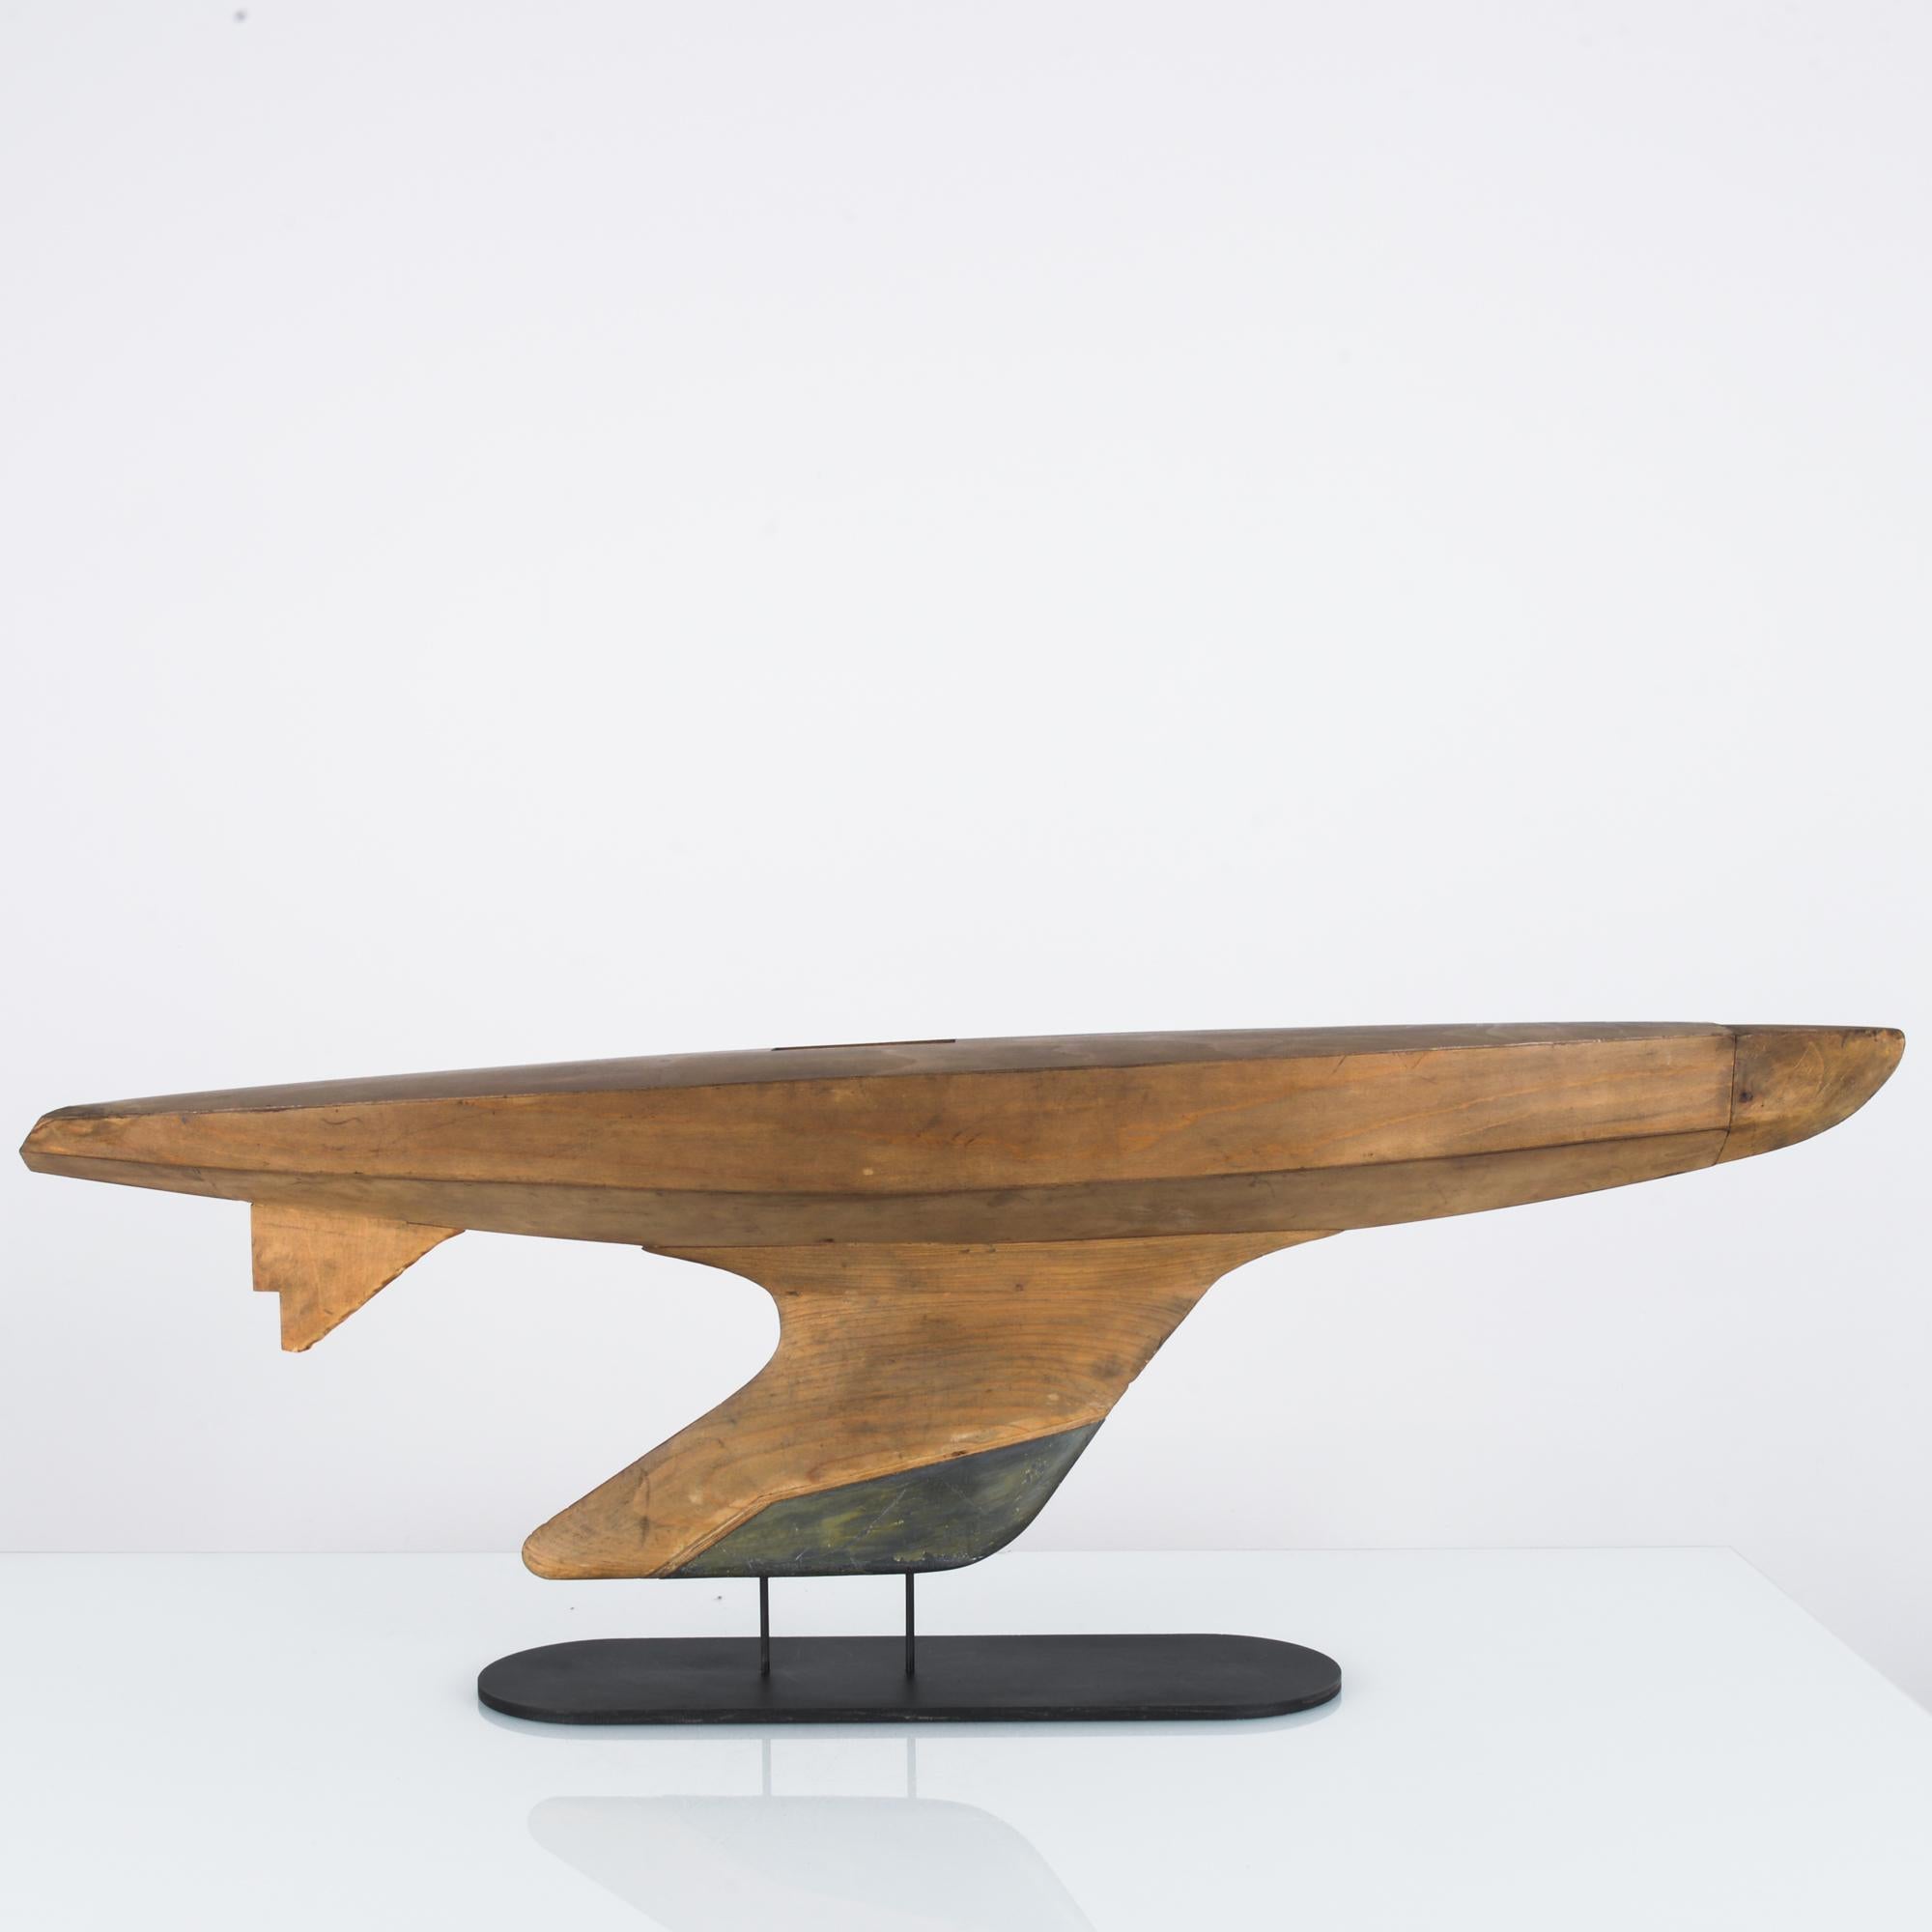 This wooden boat was made in France, circa 1960, and recalls the tranquility of lapping waves and the coastal breeze. The boat has a dynamic form and a smooth finish, which highlights its distinctive wood grain. With the bottom of the keel mounted